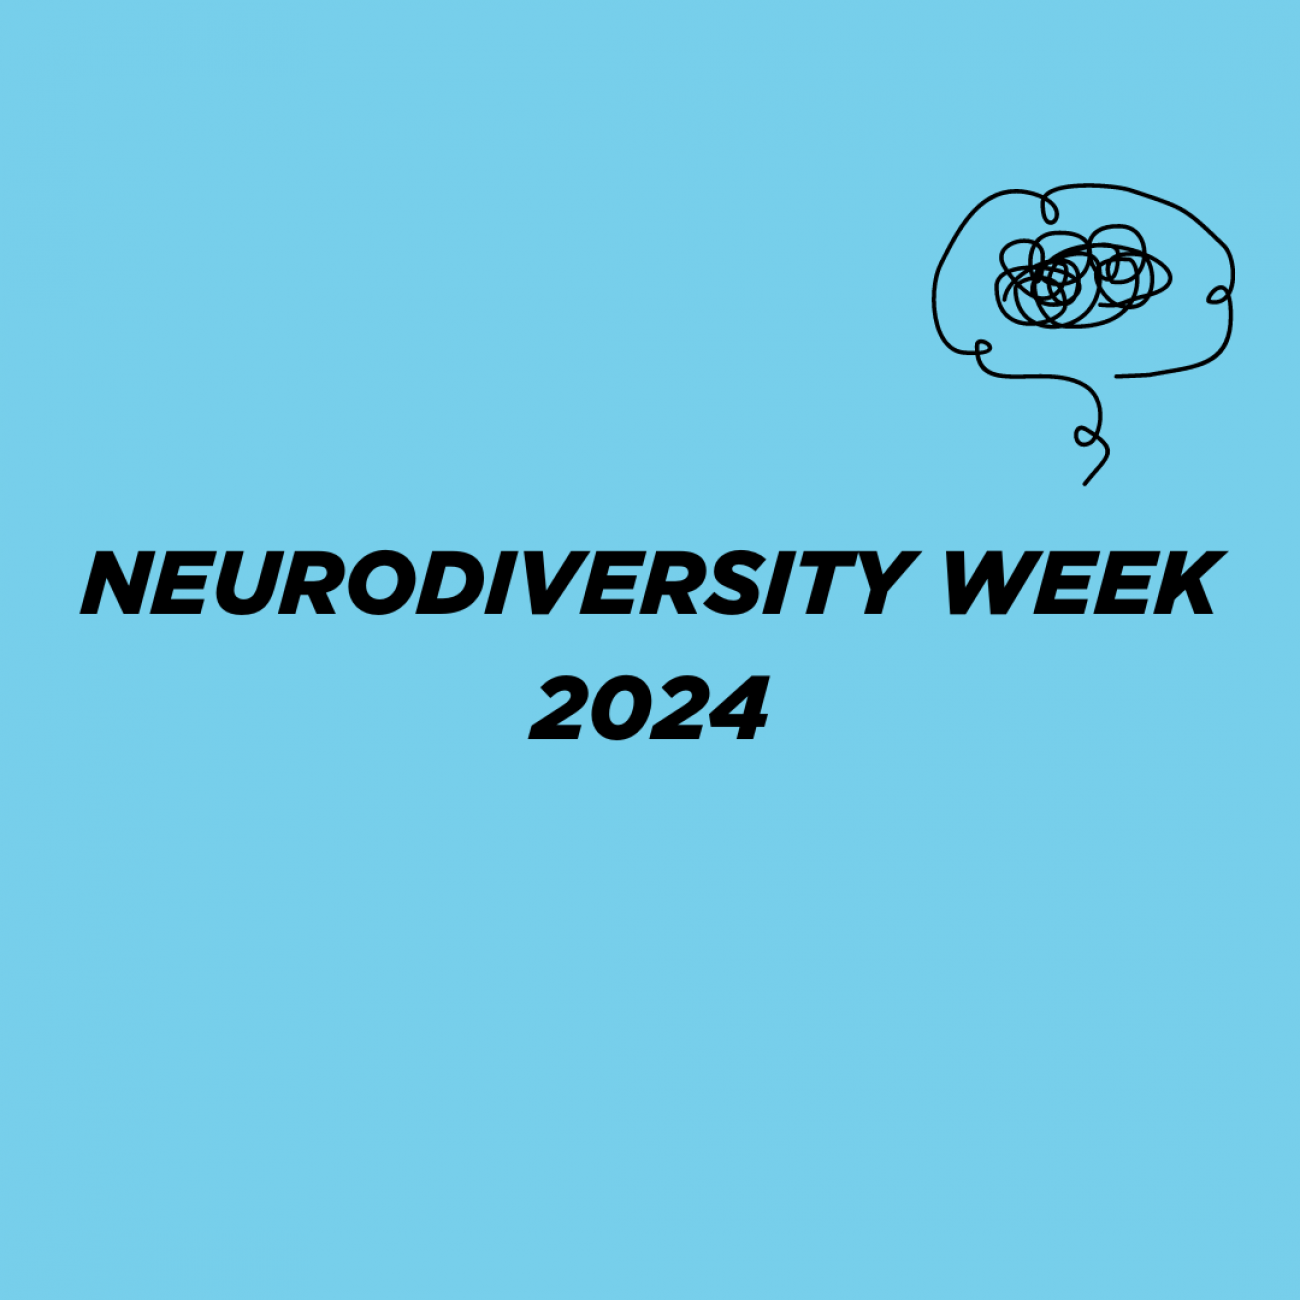 Neurodiversity celebration week banner with a blue background and large black capital text